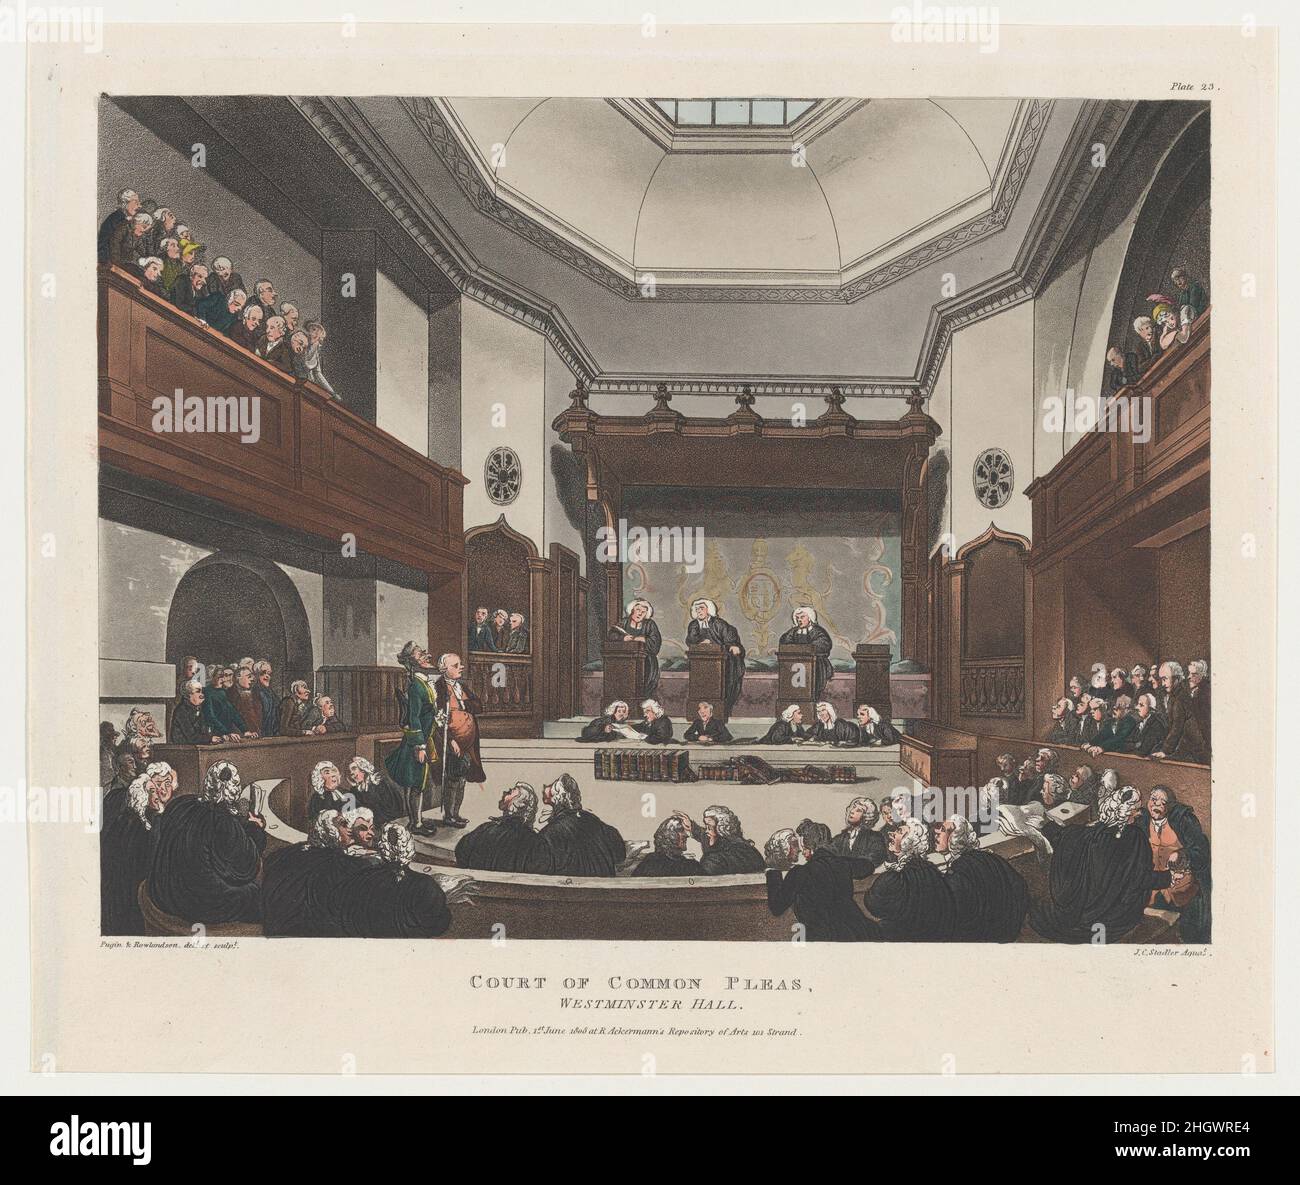 Court of Common Pleas, Westminster Hall June 1, 1808 Designed and etched by Thomas Rowlandson. Court of Common Pleas, Westminster Hall. Microcosm of London, pl. 23. Designed and etched by Thomas Rowlandson (British, London 1757–1827 London). June 1, 1808. Hand-colored etching and aquatint. Rudolph Ackermann, London (active 1794–1829). Prints Stock Photo